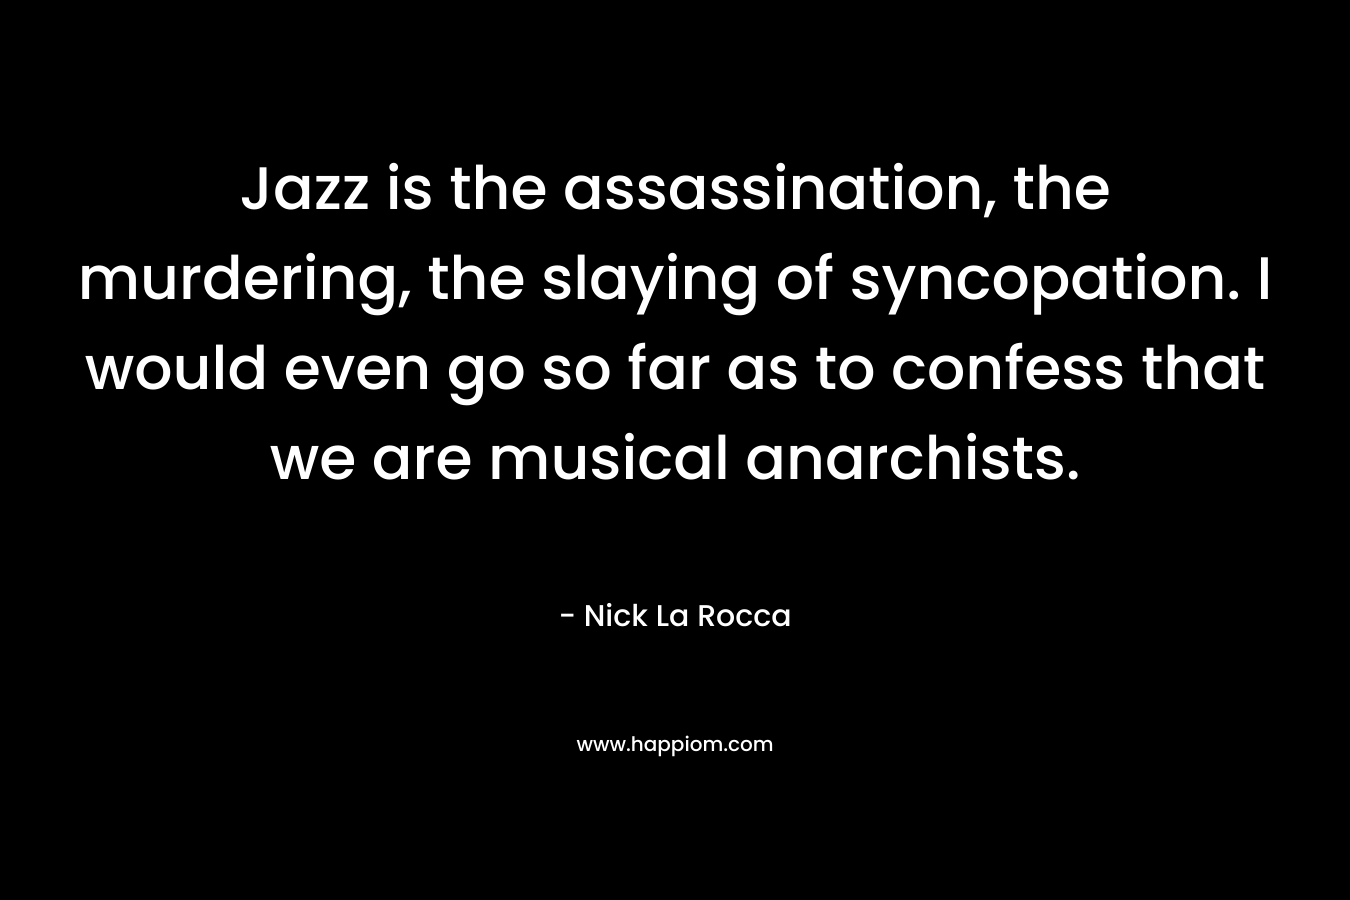 Jazz is the assassination, the murdering, the slaying of syncopation. I would even go so far as to confess that we are musical anarchists. – Nick La Rocca